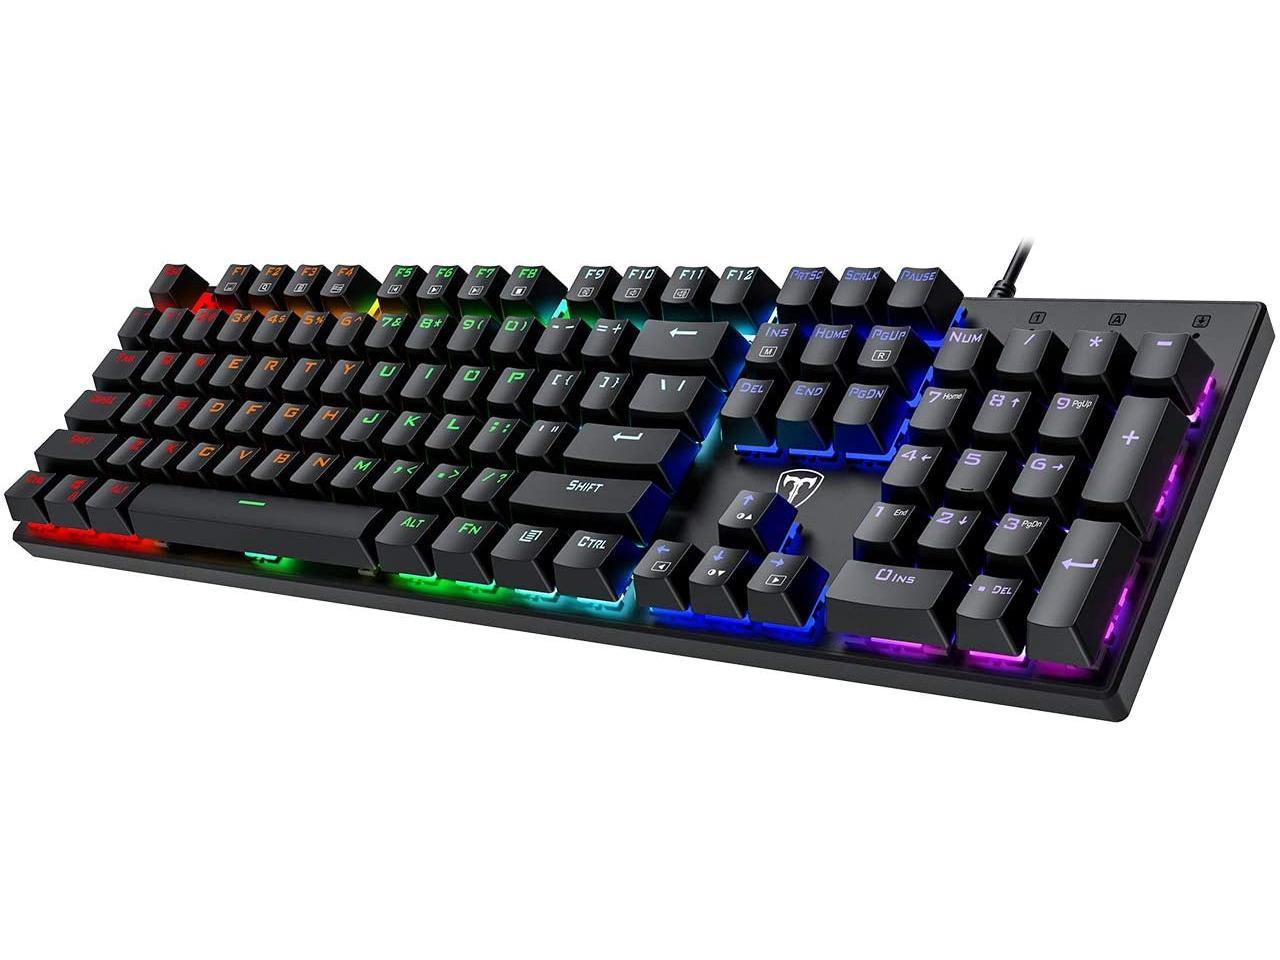 LED Backlit Wooden Portable Detachable Cable Wired Gaming Keyboard for PC/Mac Gamer 64 Key US-Layout Cacoy RGB Mechanical Keyboard Typist Cherry MX Blue Switches